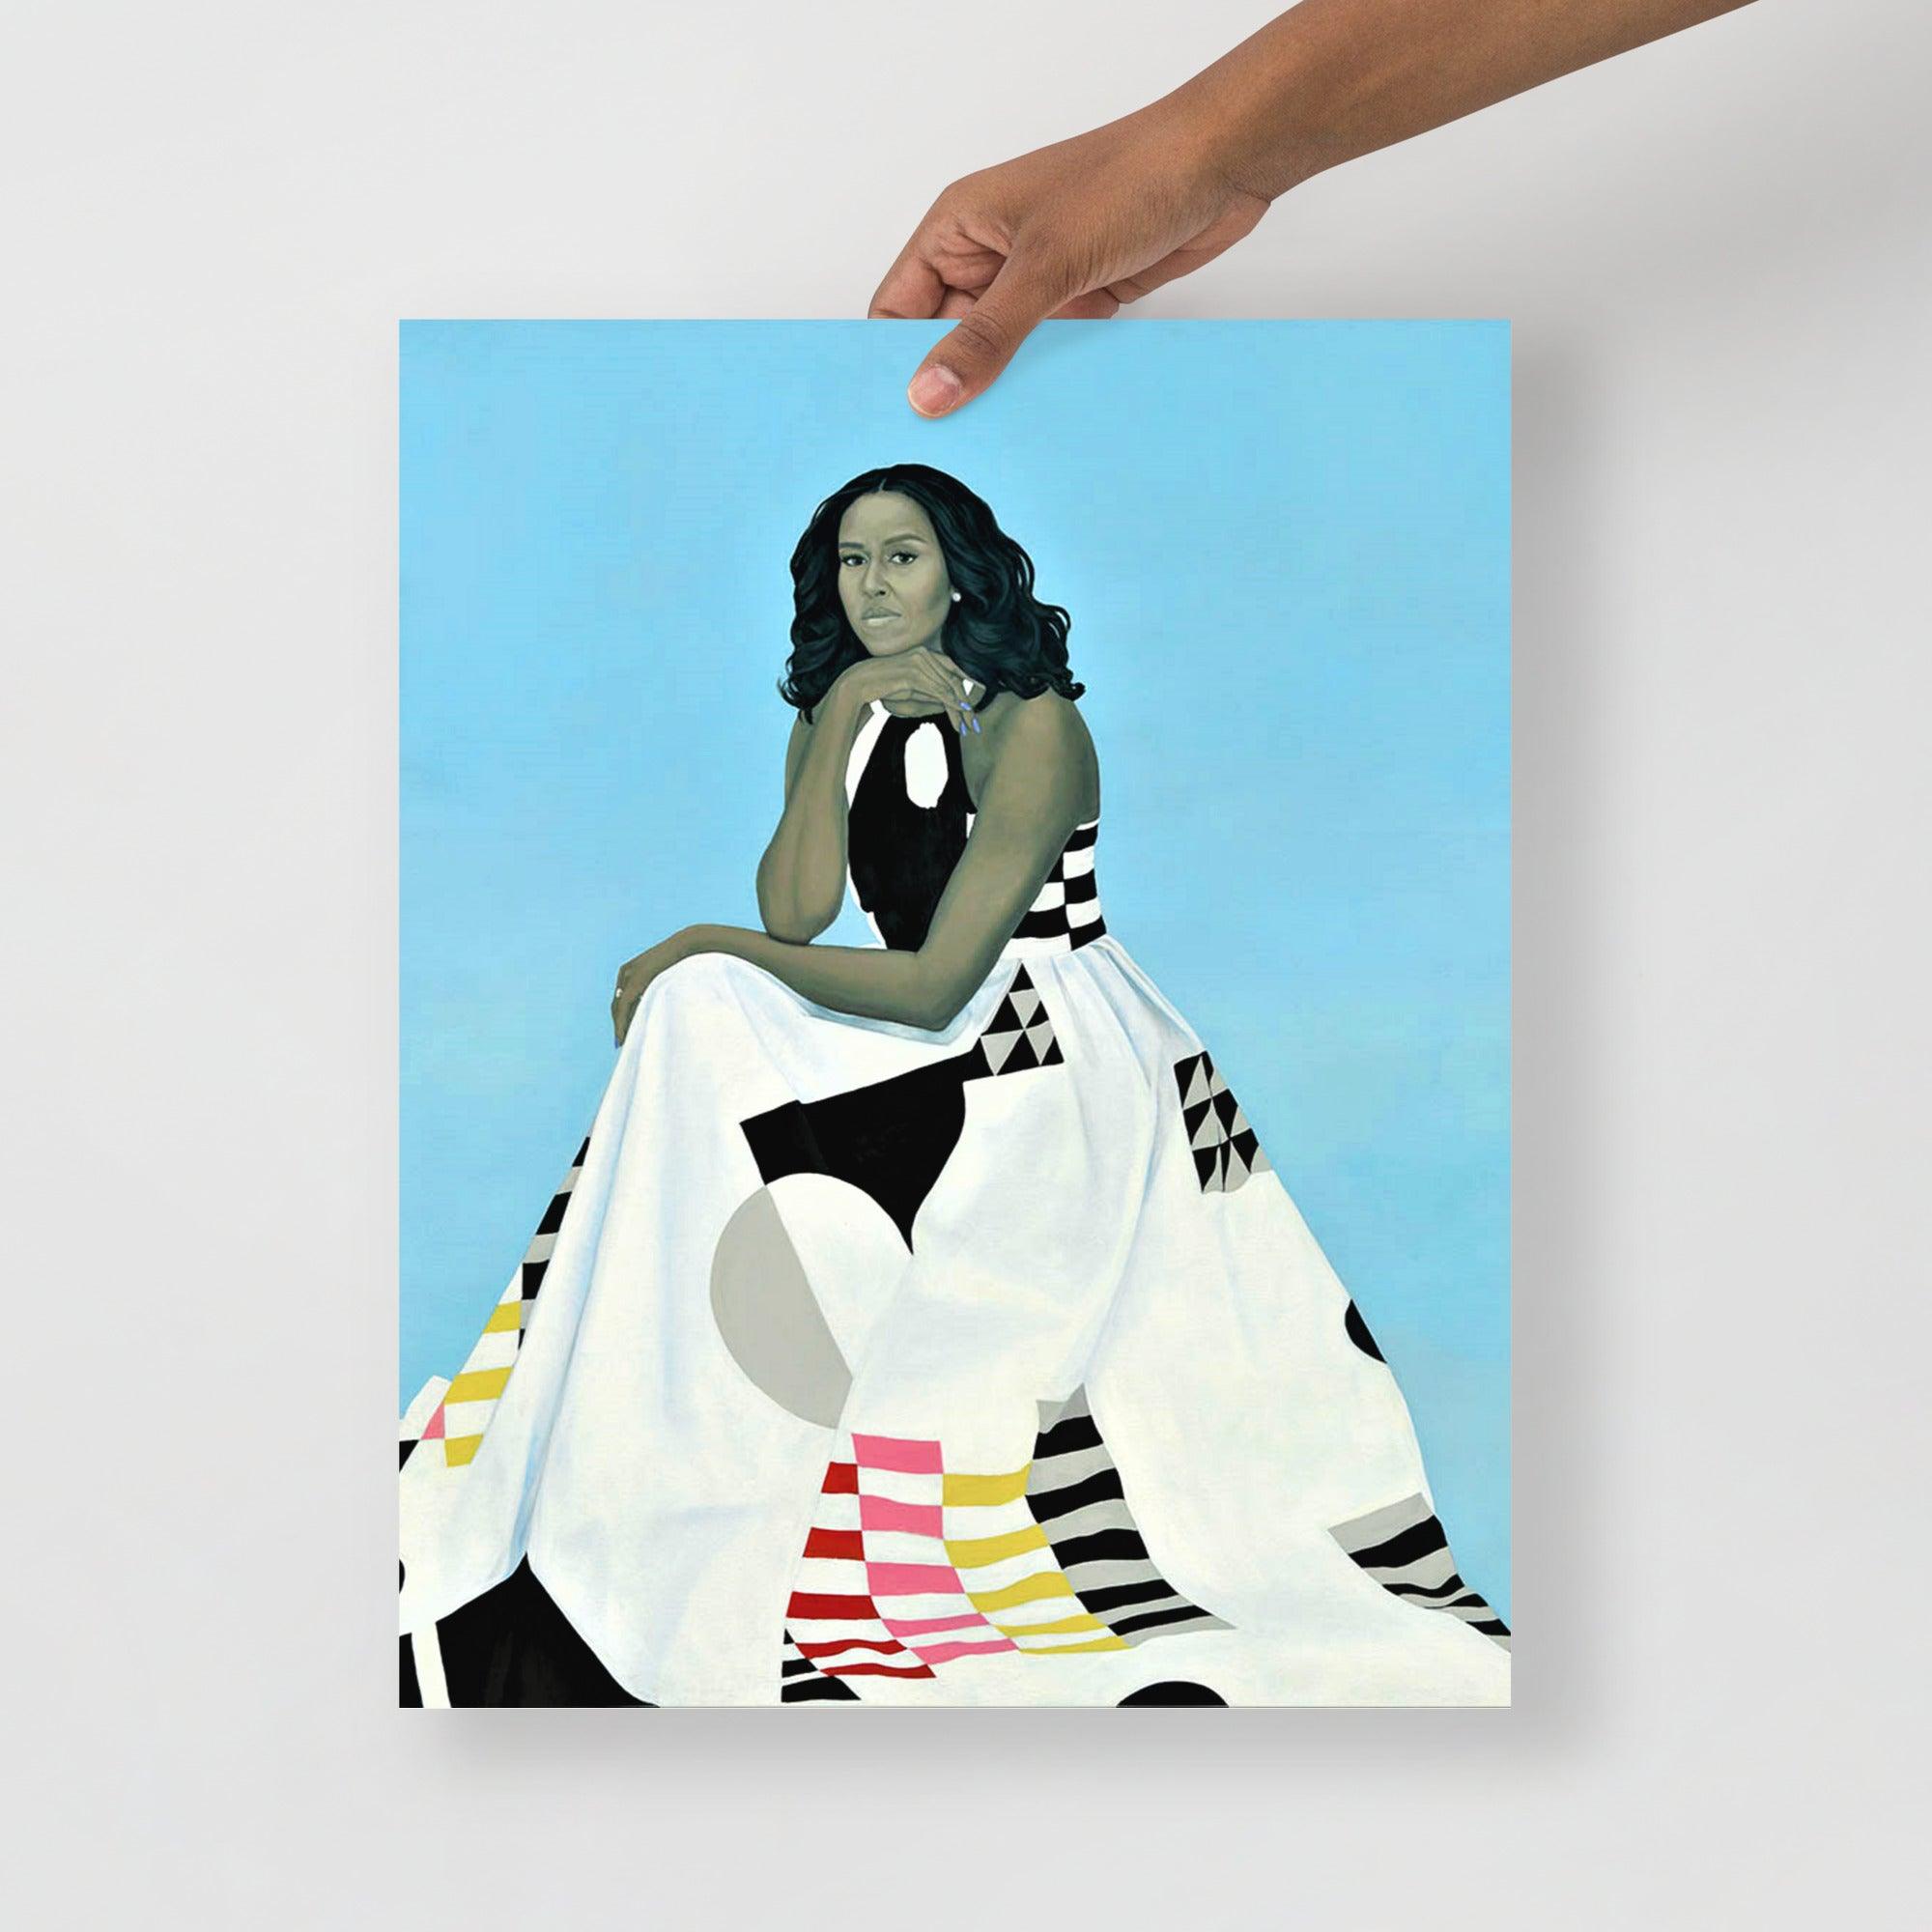 A First Lady Michelle Obama poster on a plain backdrop in size 16x20”.